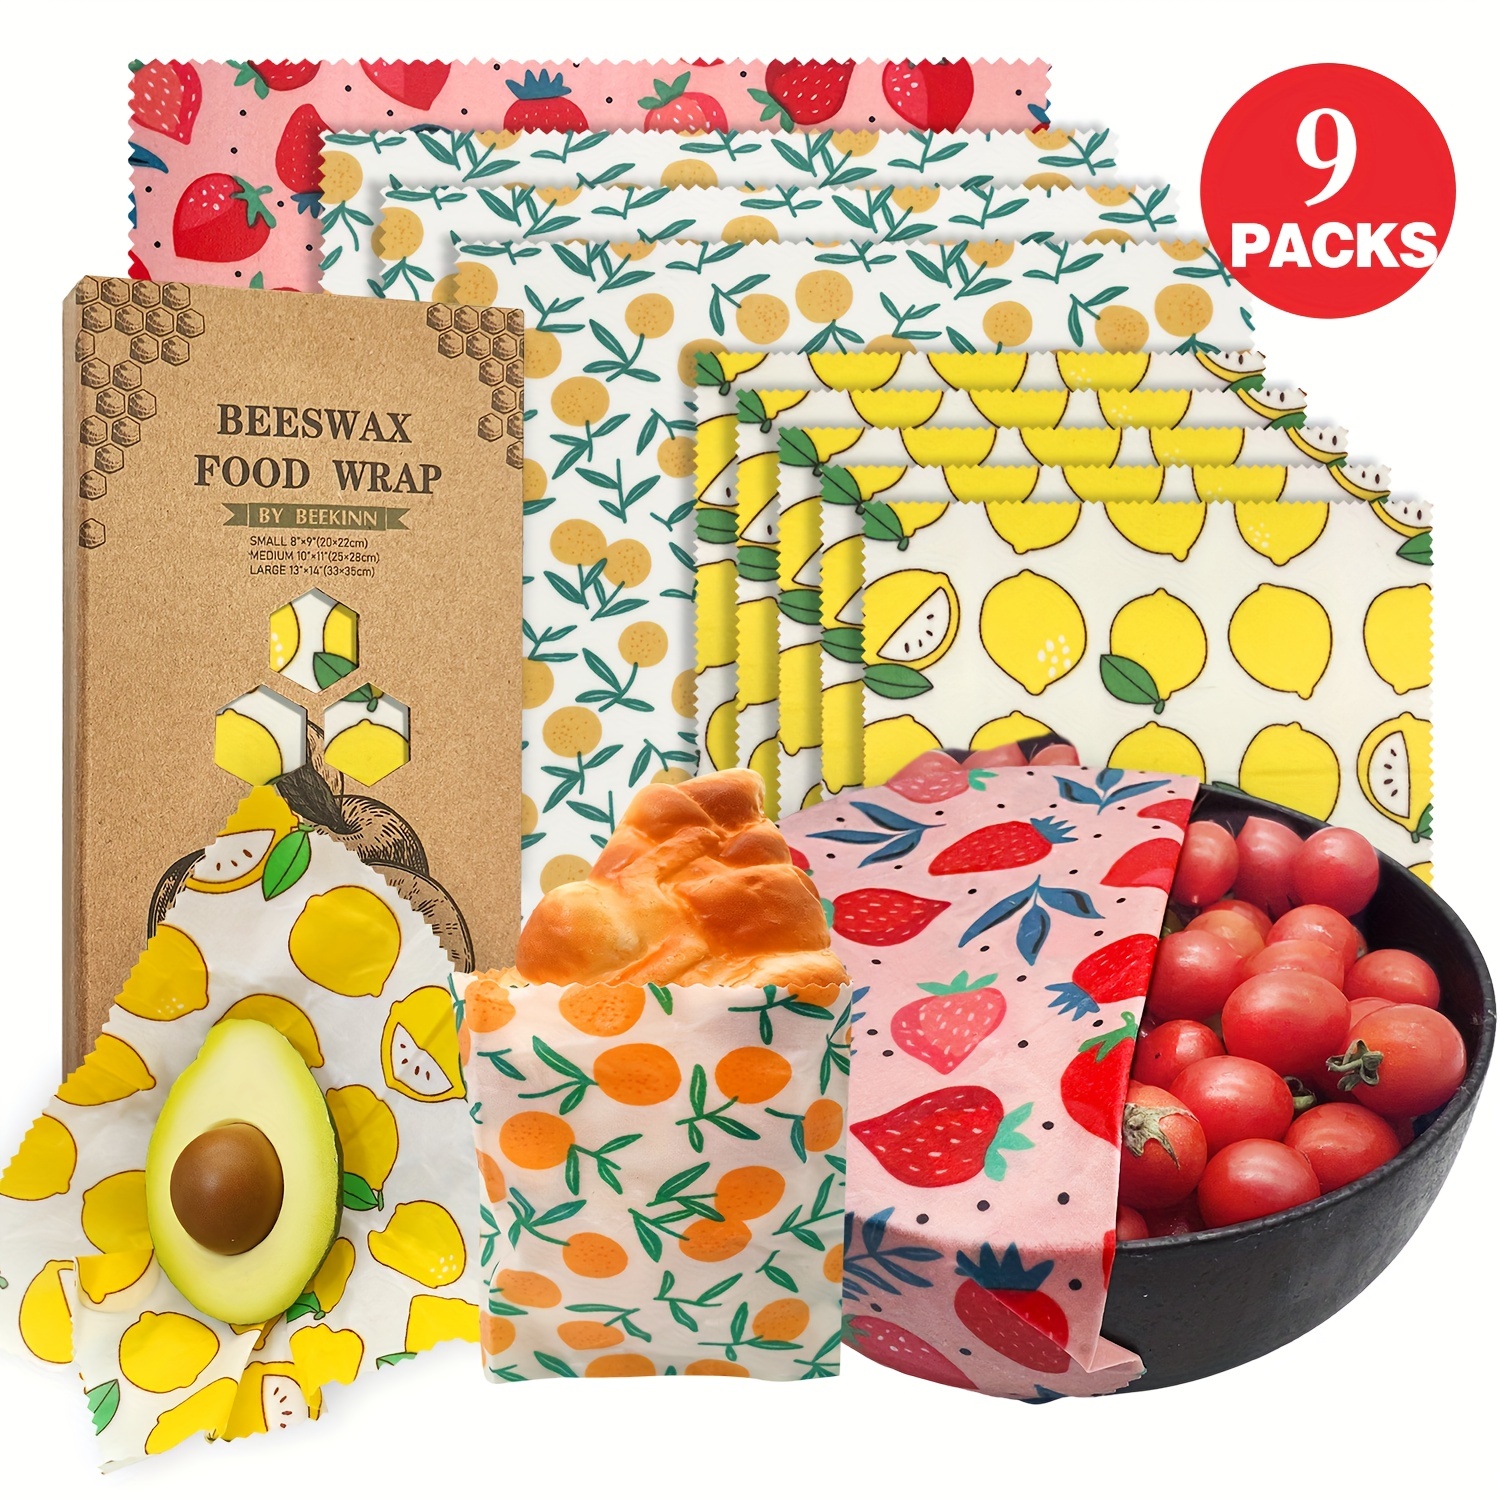 3 Sheets Of Reusable Food Packaging Beeswax Wraps For Food Storage